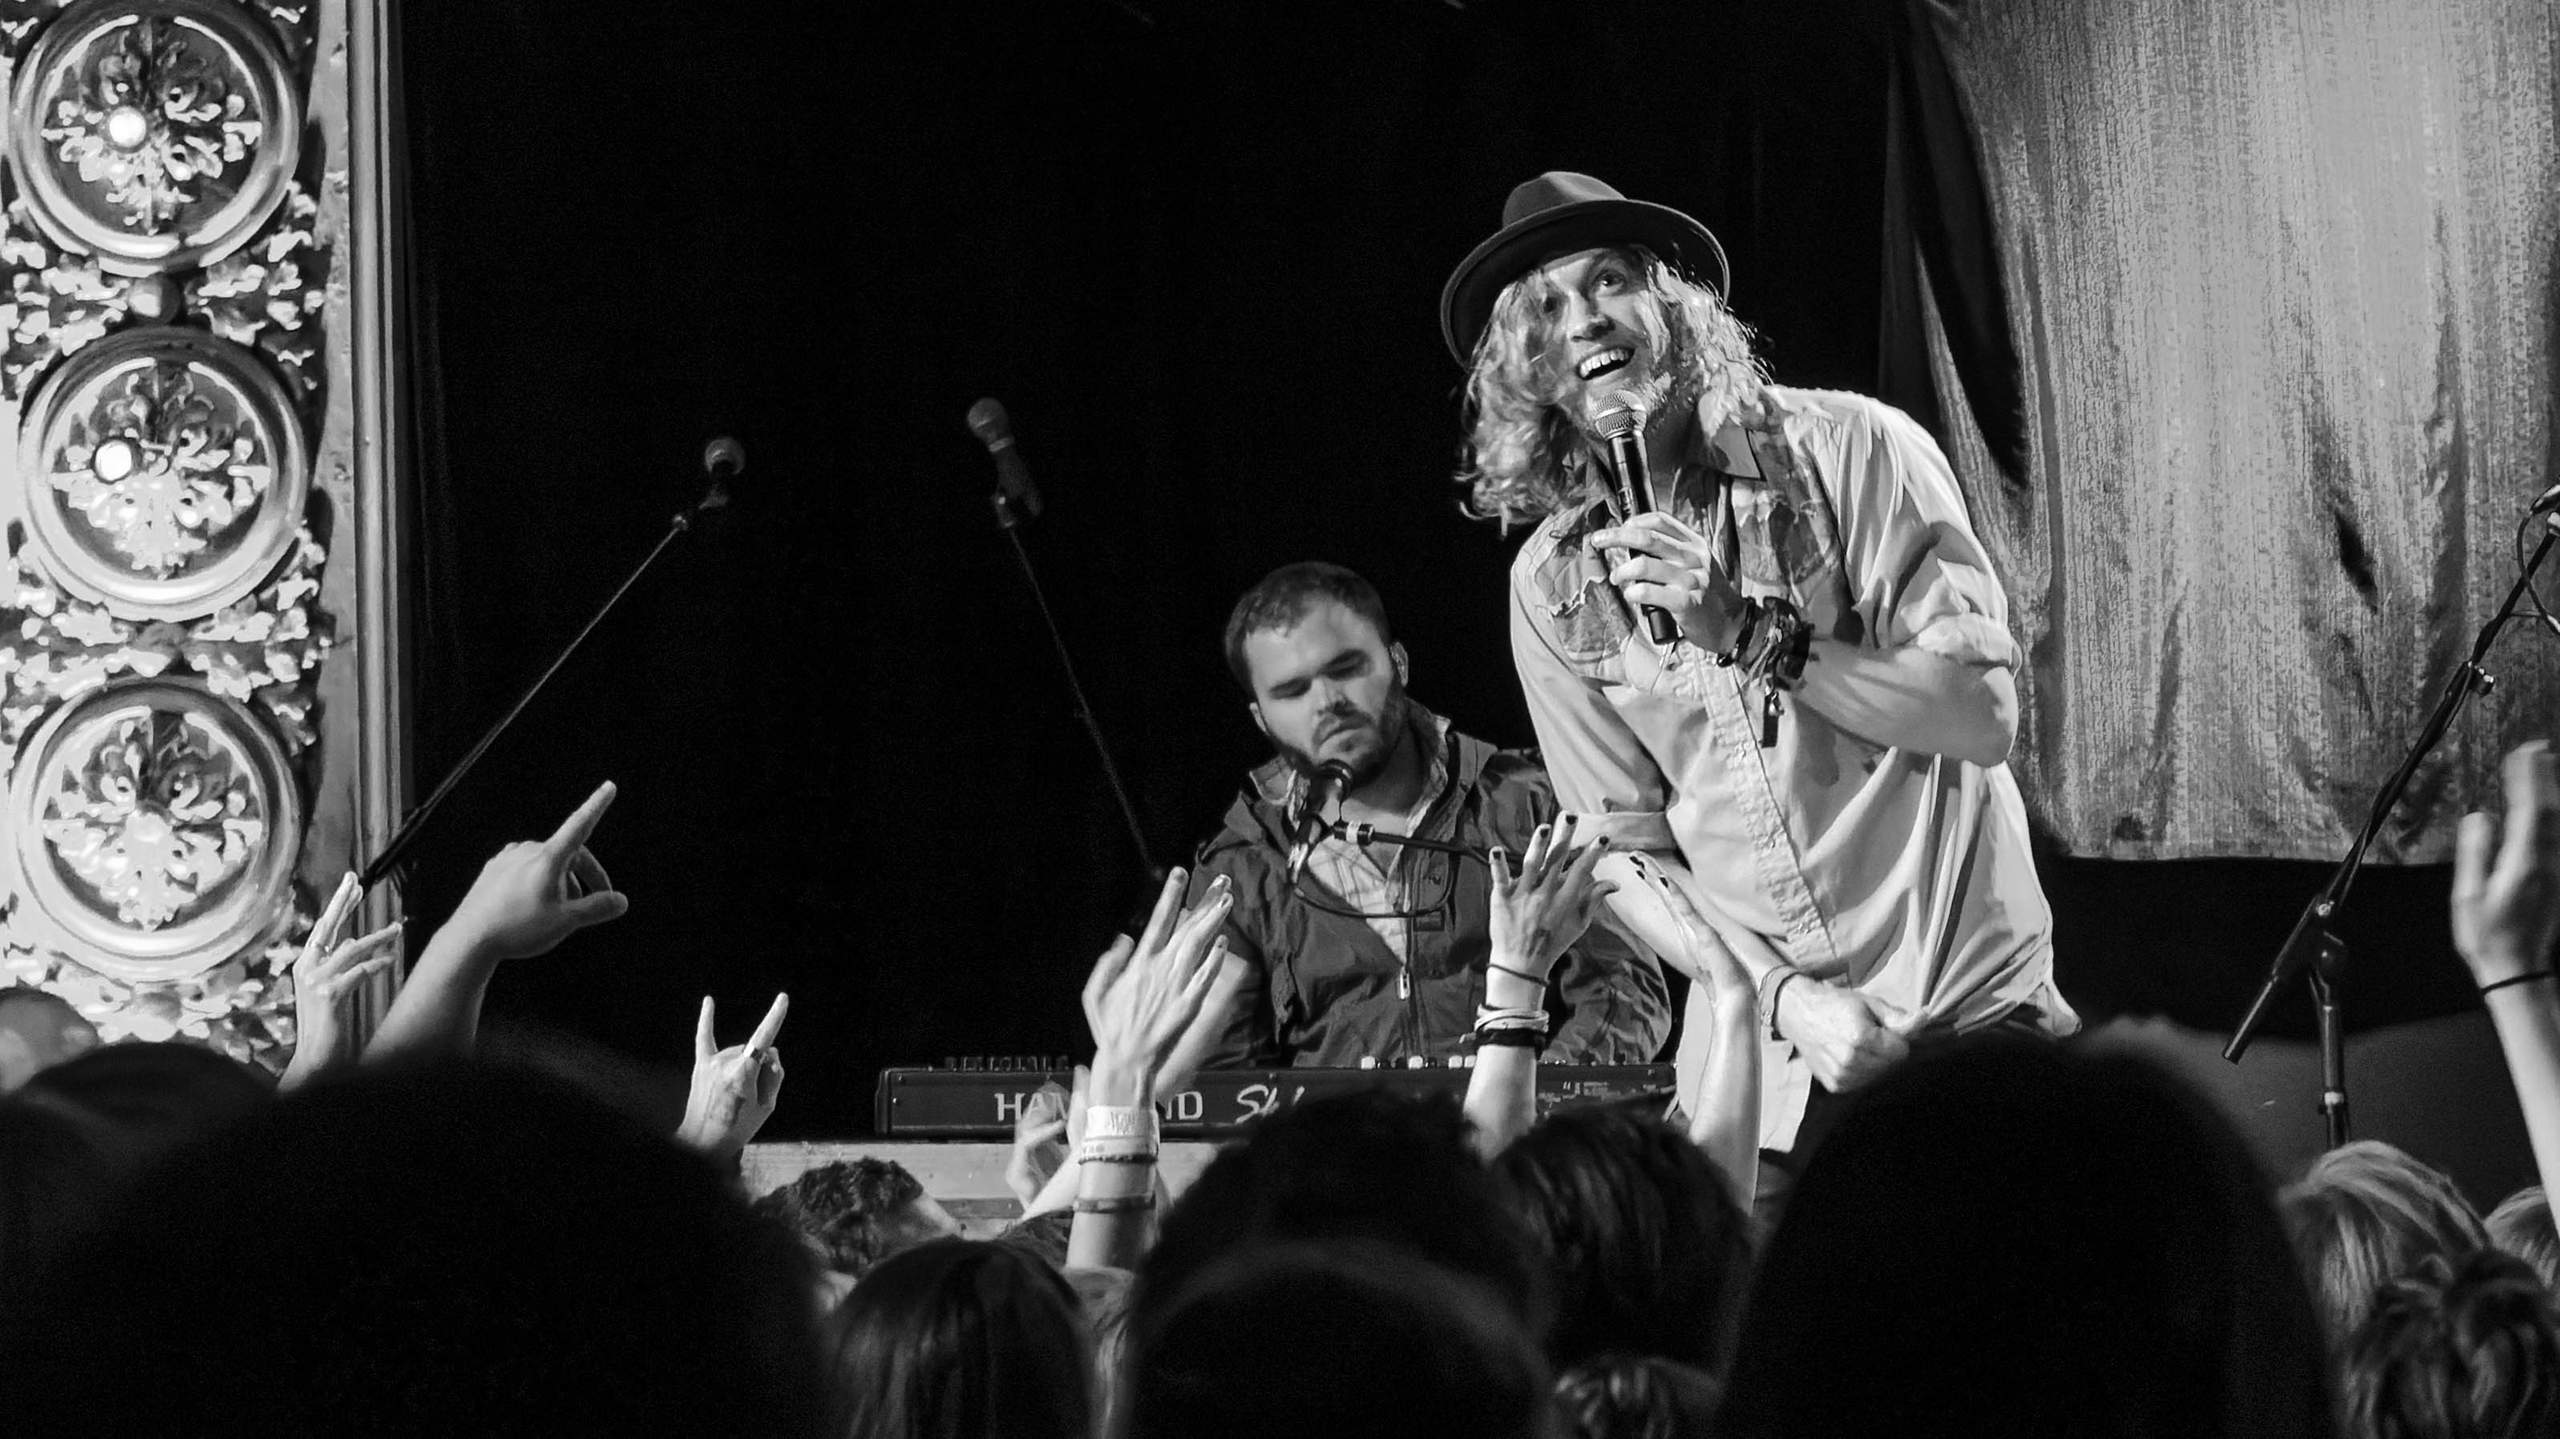 Allen Stone performing at The Majestic in Madison, WI June 24th, 2013, photography by Ross Harried for Second Crop Music